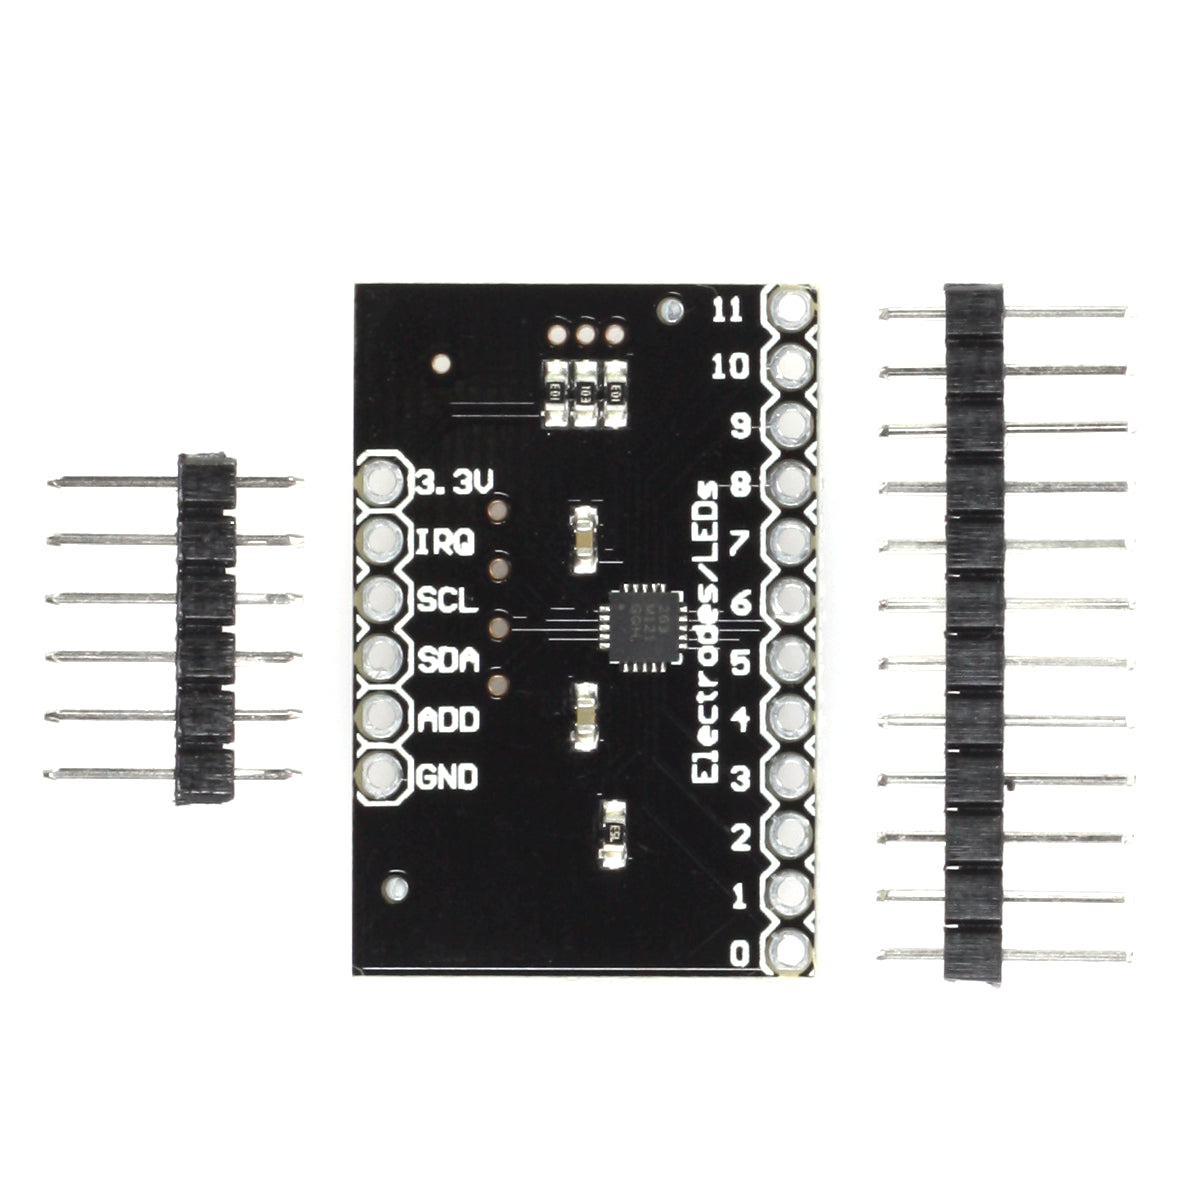 MPR121 Touch Controller Breakout, 12 Channels, I2C